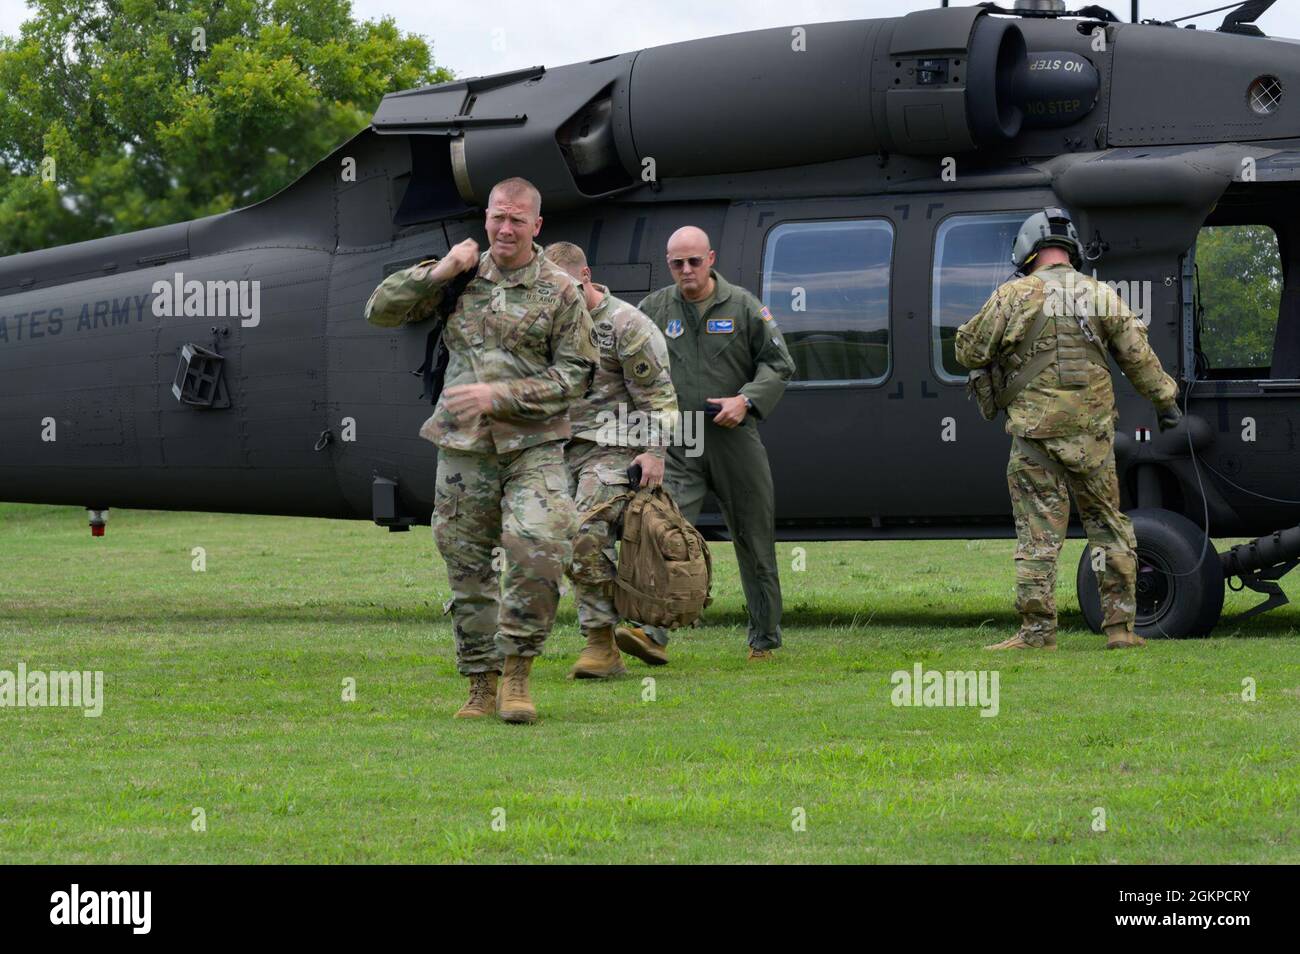 U.S. Army Maj. Gen. Thomas Carden, Adjutant General of Georgia, arrives to observe a training exercise at the Central Georgia Technical College, Warner Robins, Georgia, June 12, 2021. Nearly 50 personnel with the 116th Medical Group, Detachment 1, trained with civilian medical professionals and local authorities to respond to a mass casualty scenario in a two-day exercise. Stock Photo